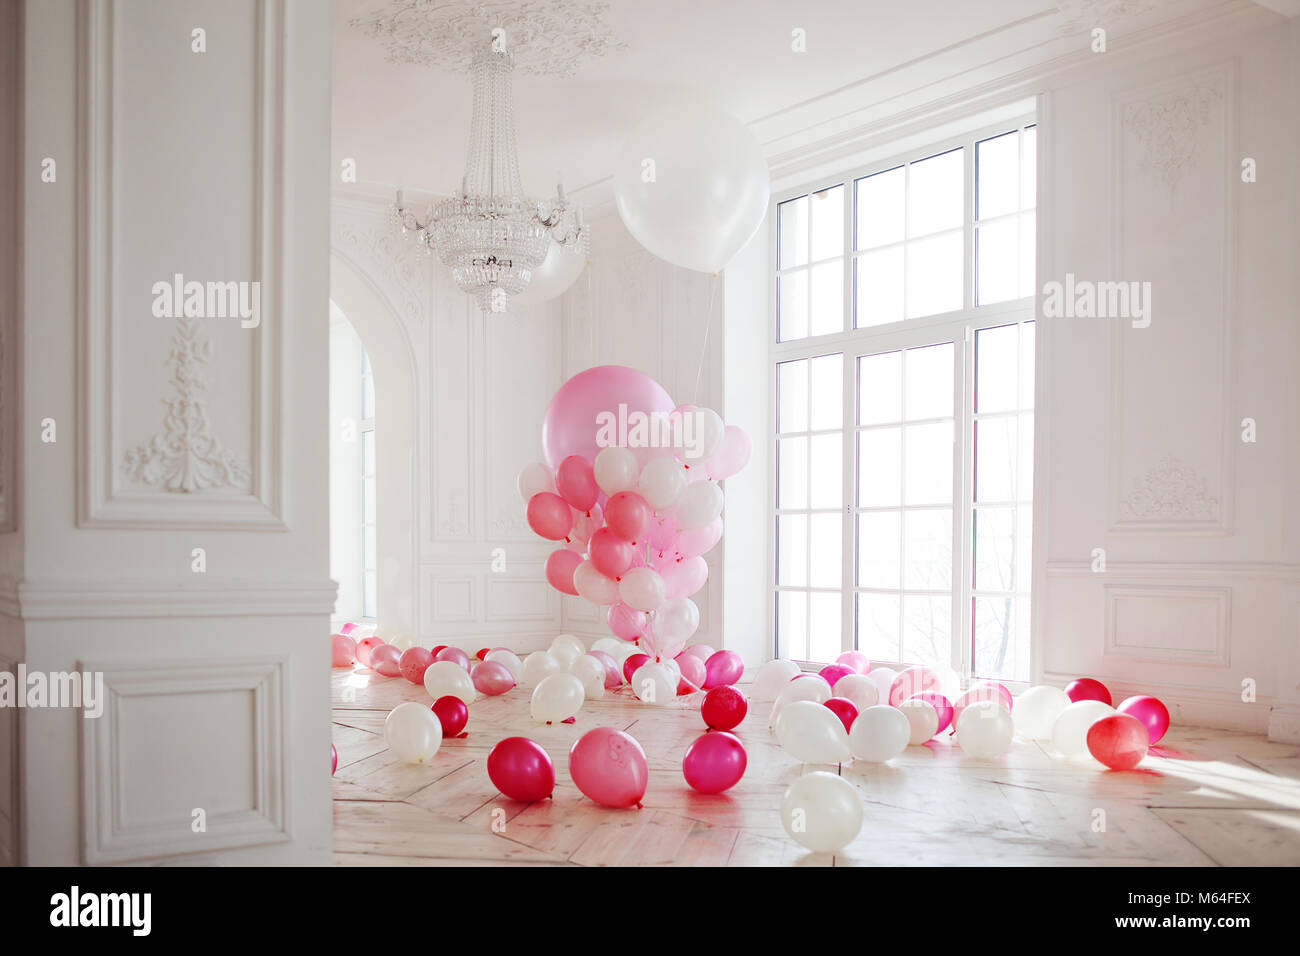 Luxurious living room with large window to the floor. The Palace is filled with pink balloons Stock Photo